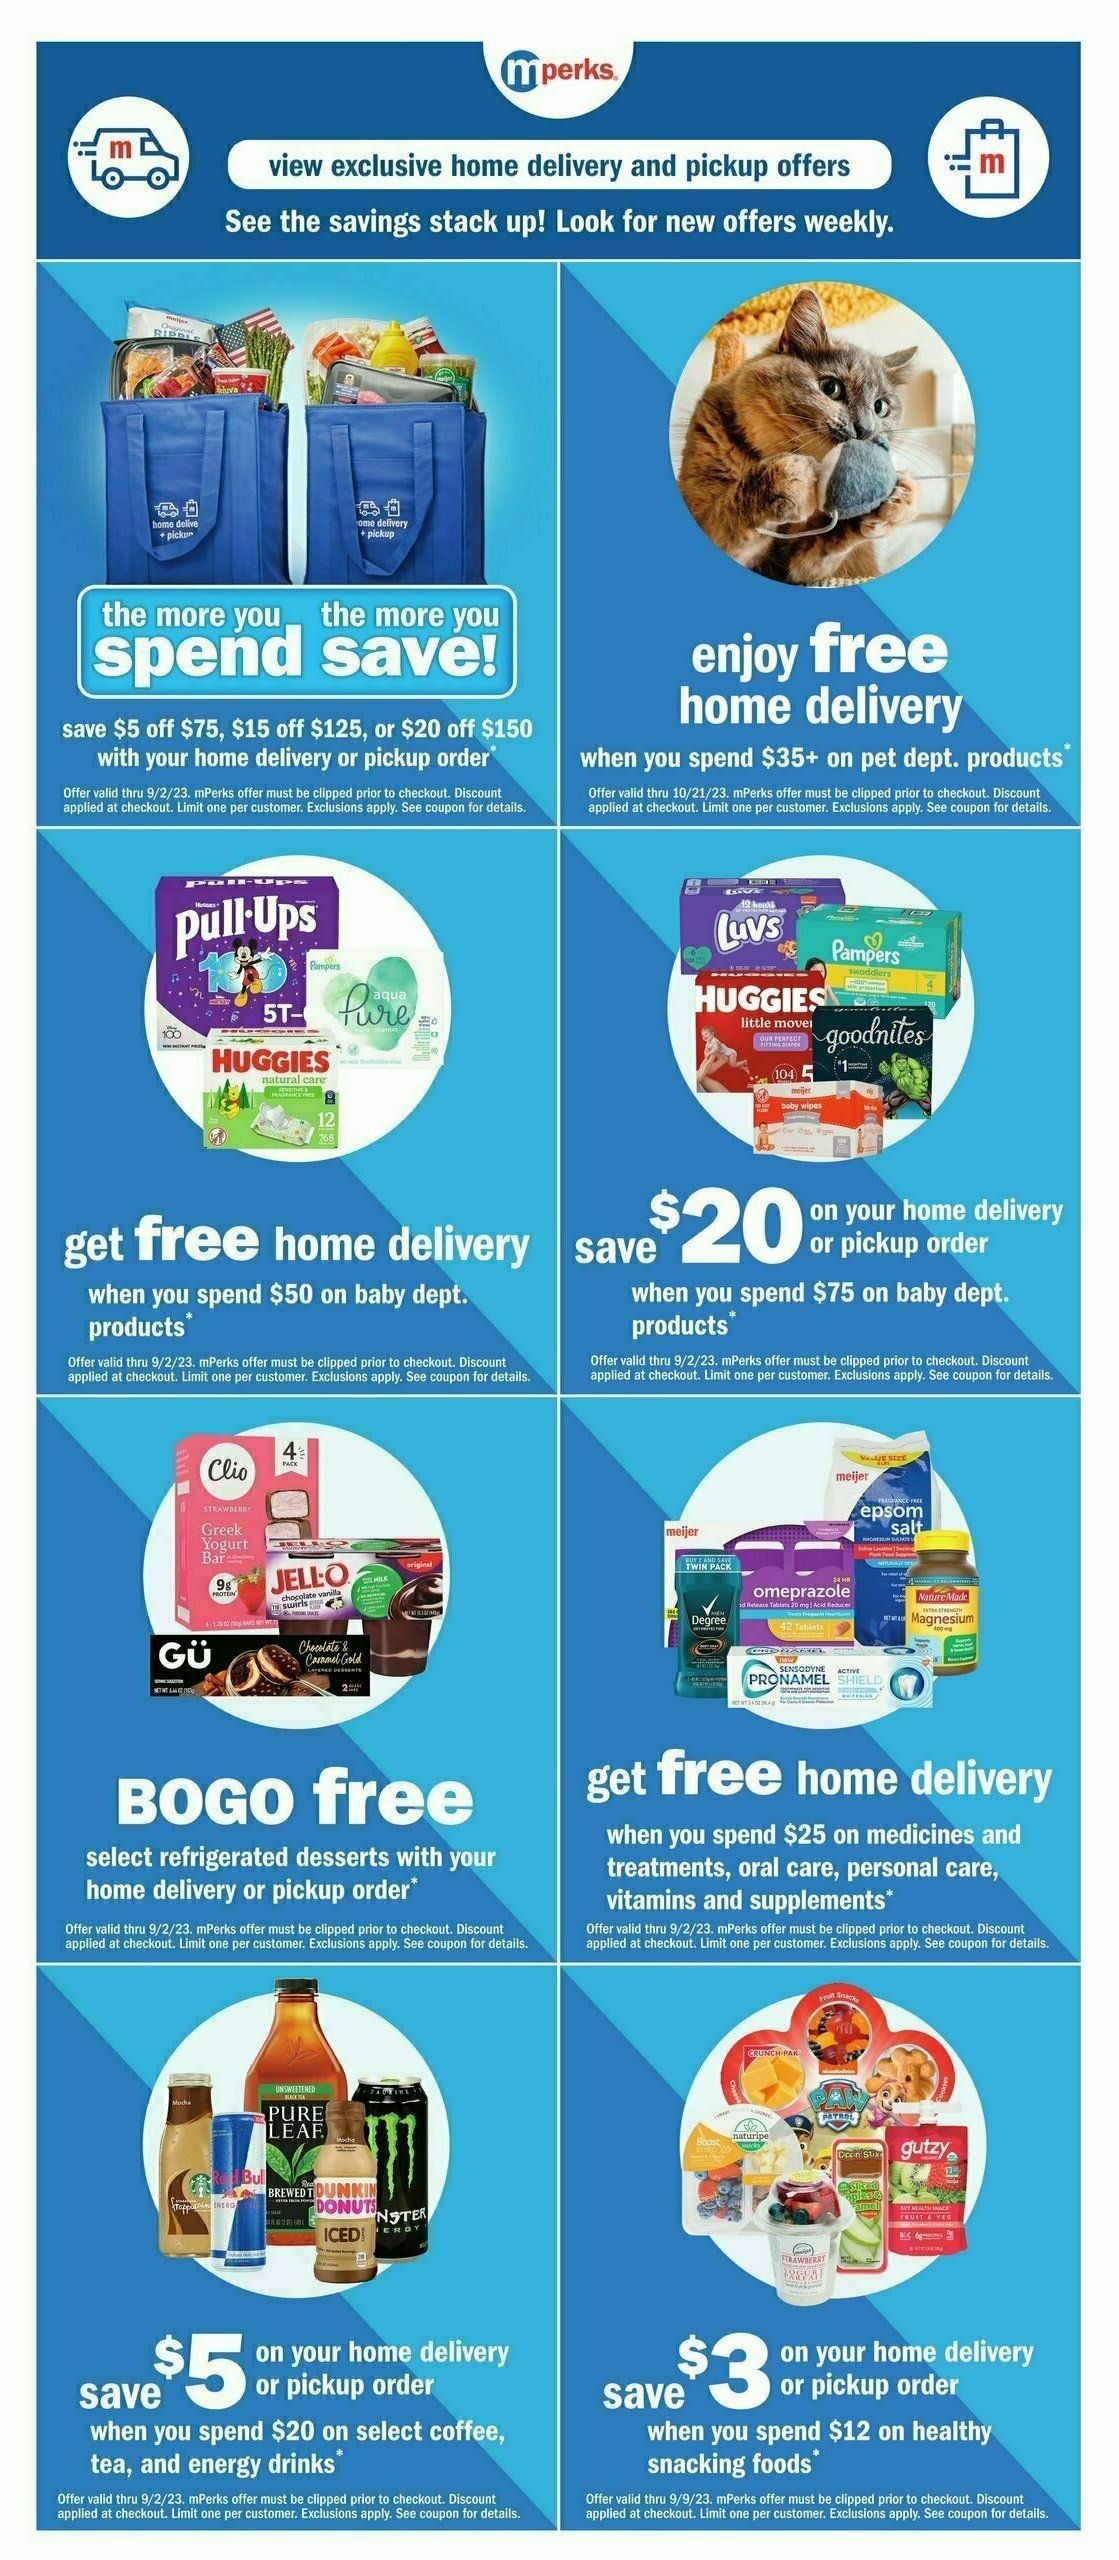 Meijer Weekly Ad from August 27